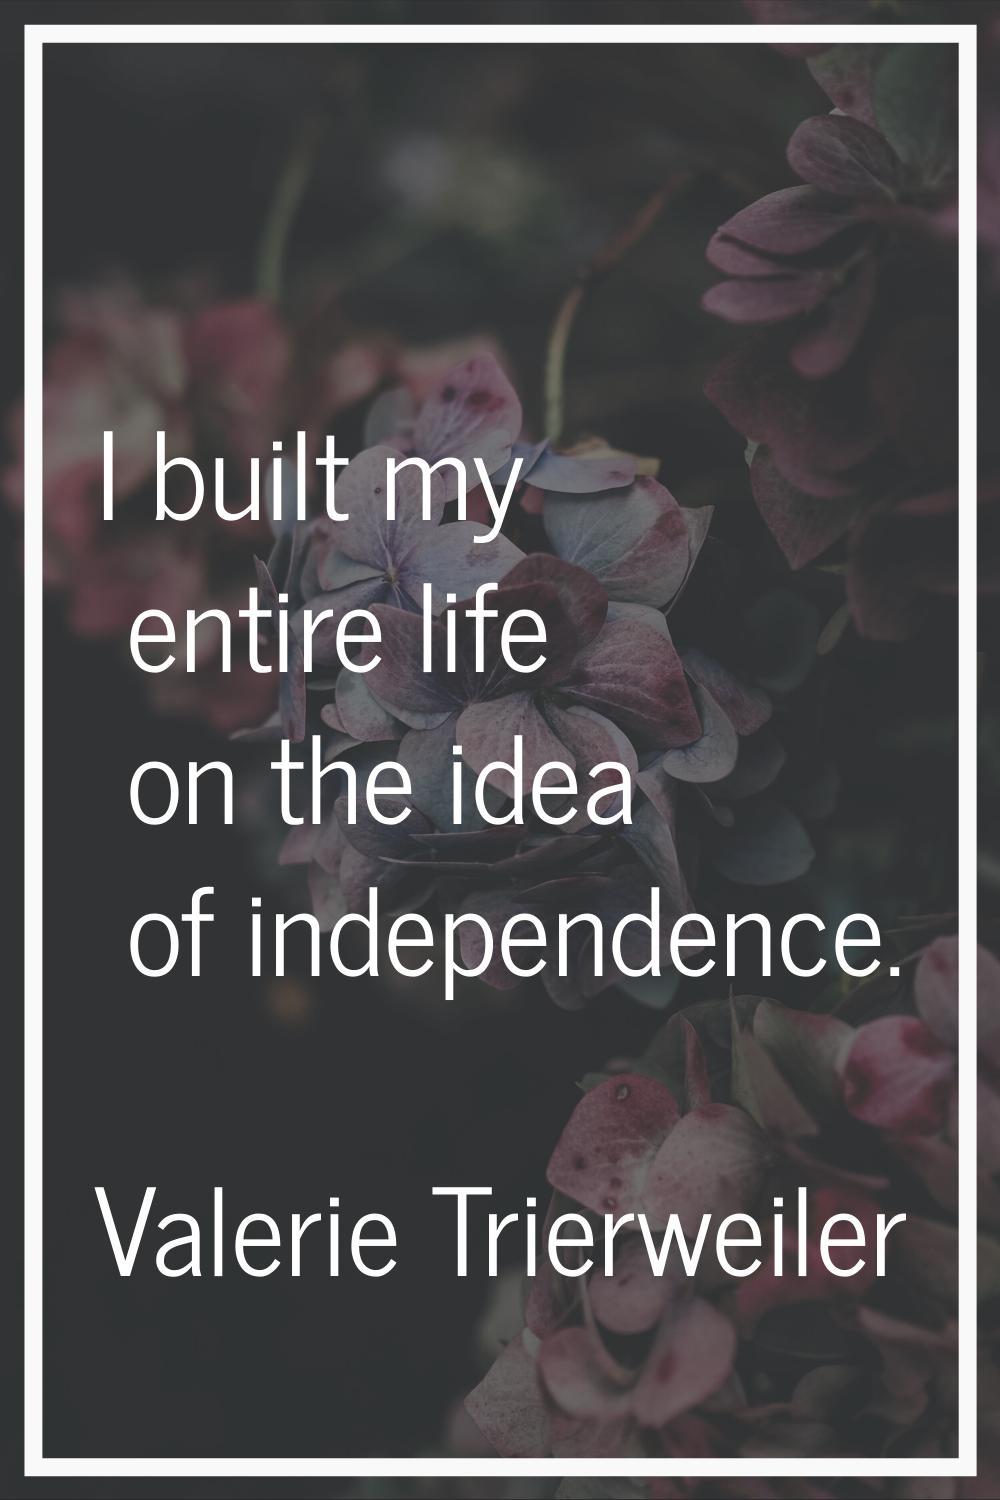 I built my entire life on the idea of independence.